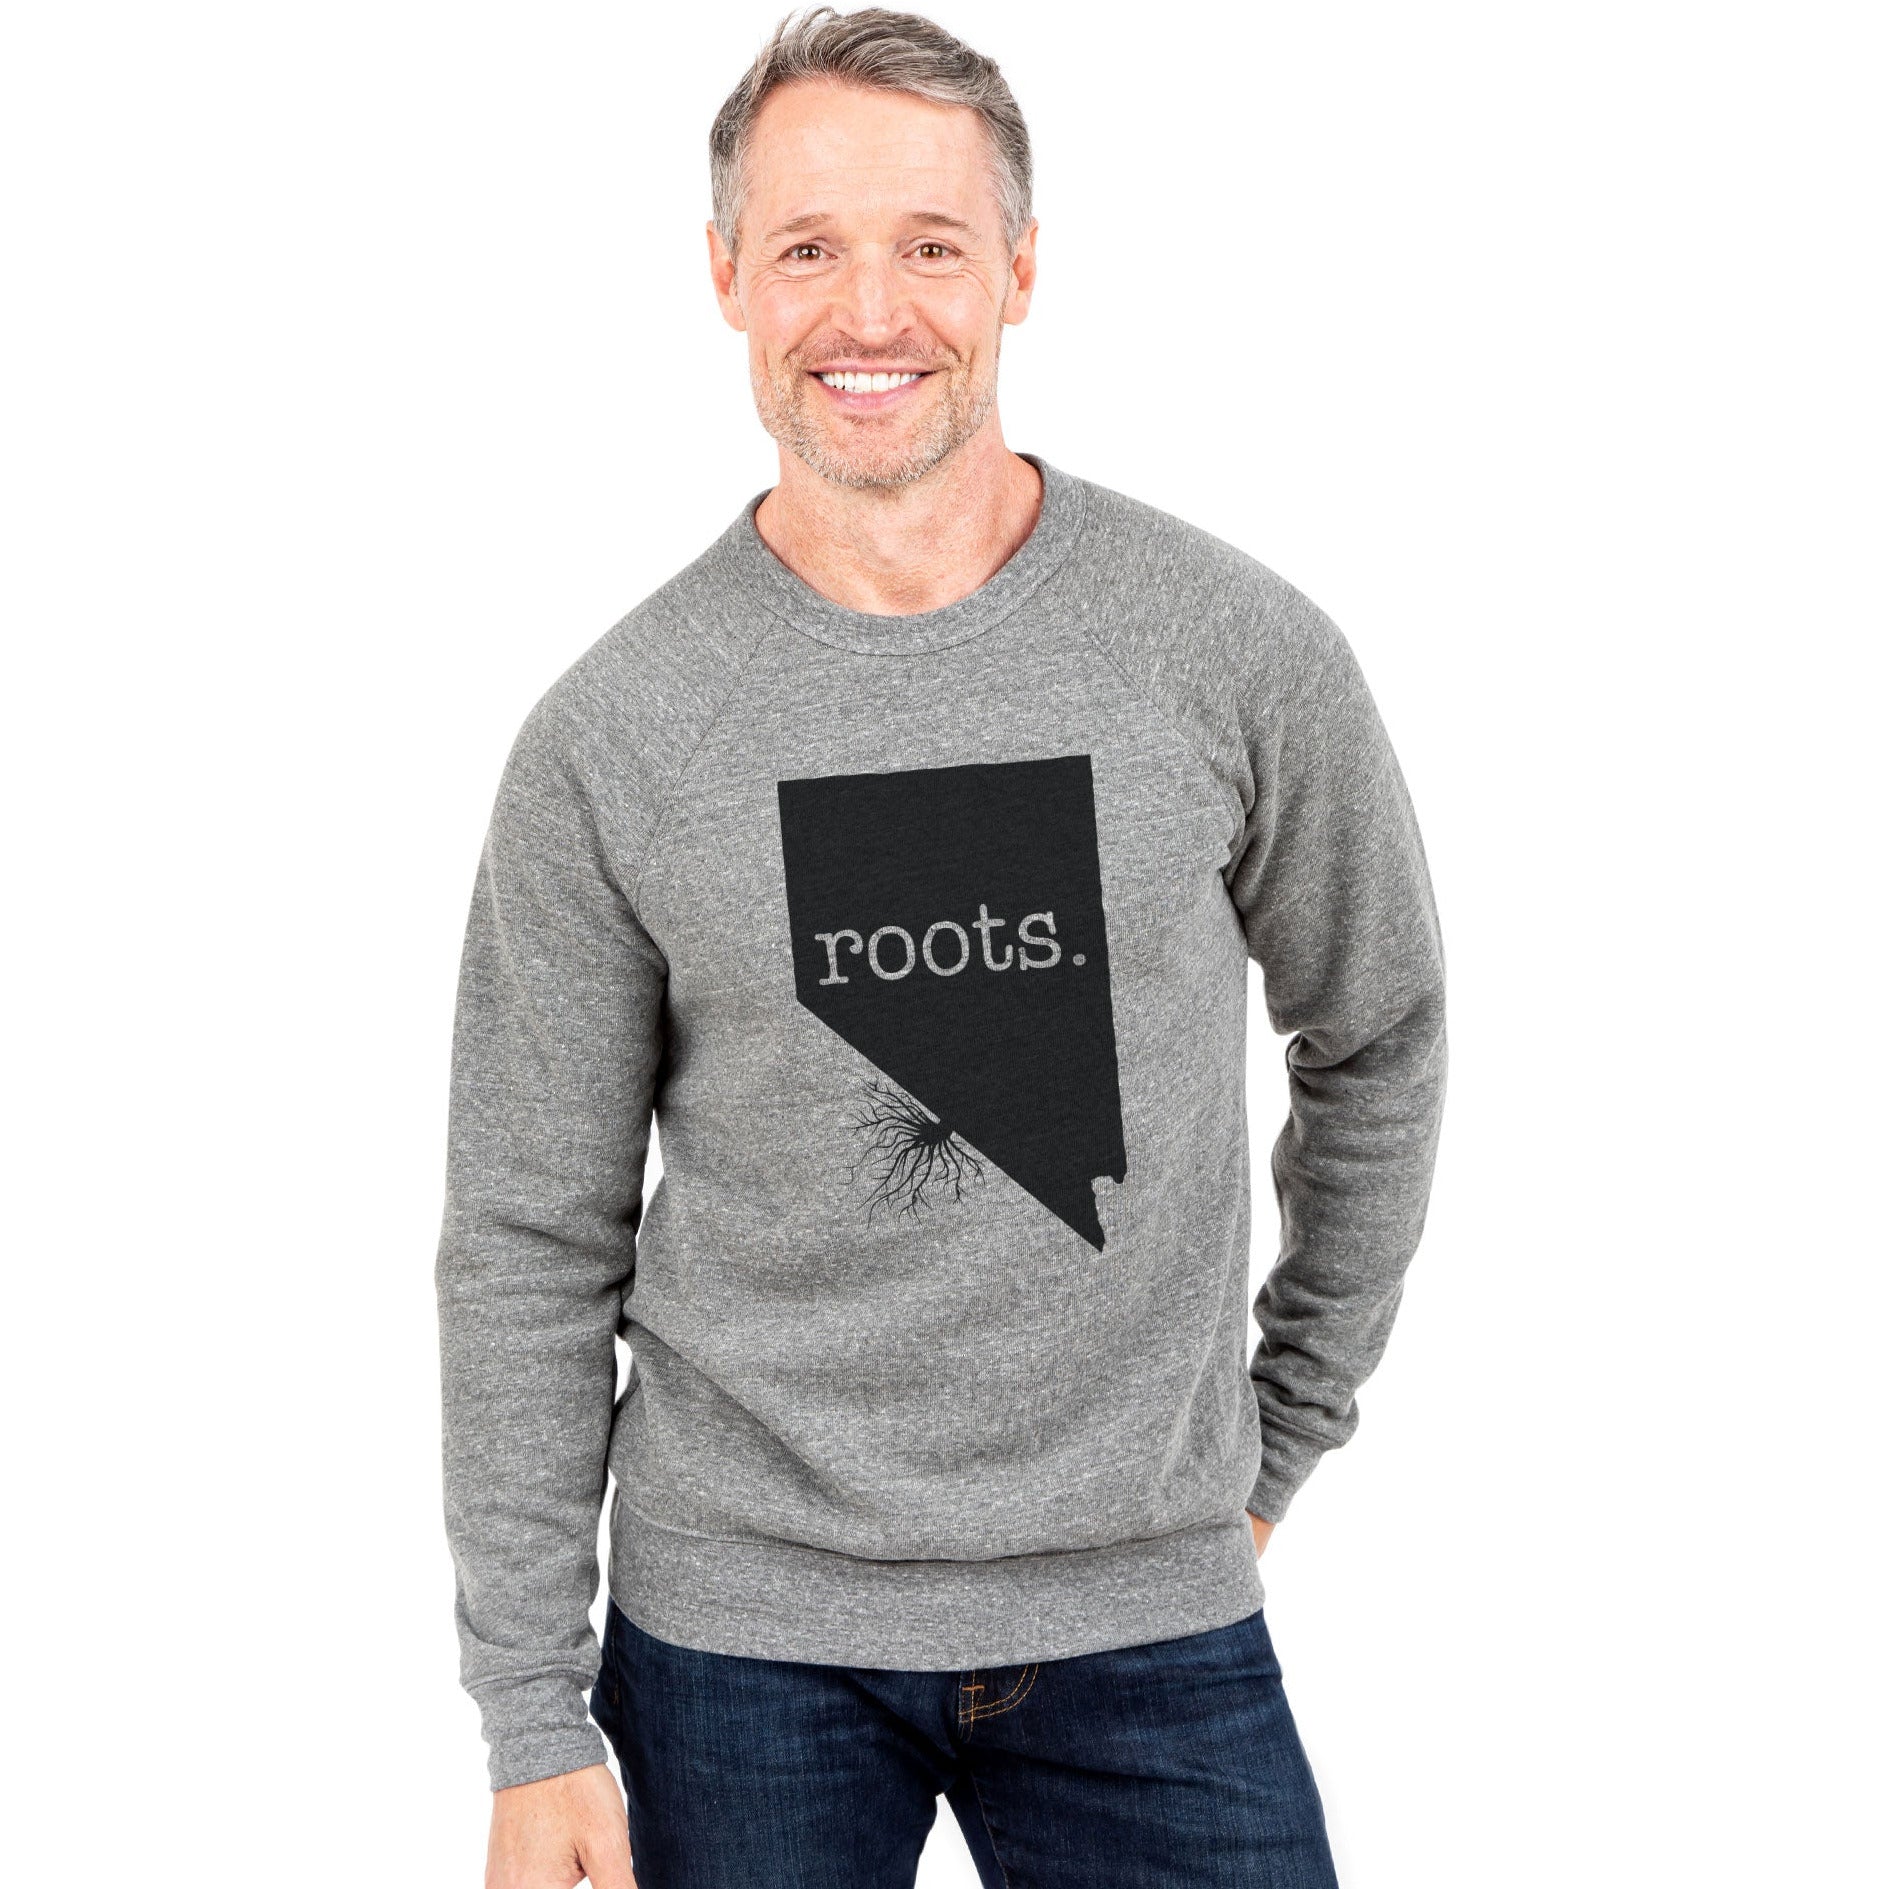 Roots State Nevada - Stories You Can Wear